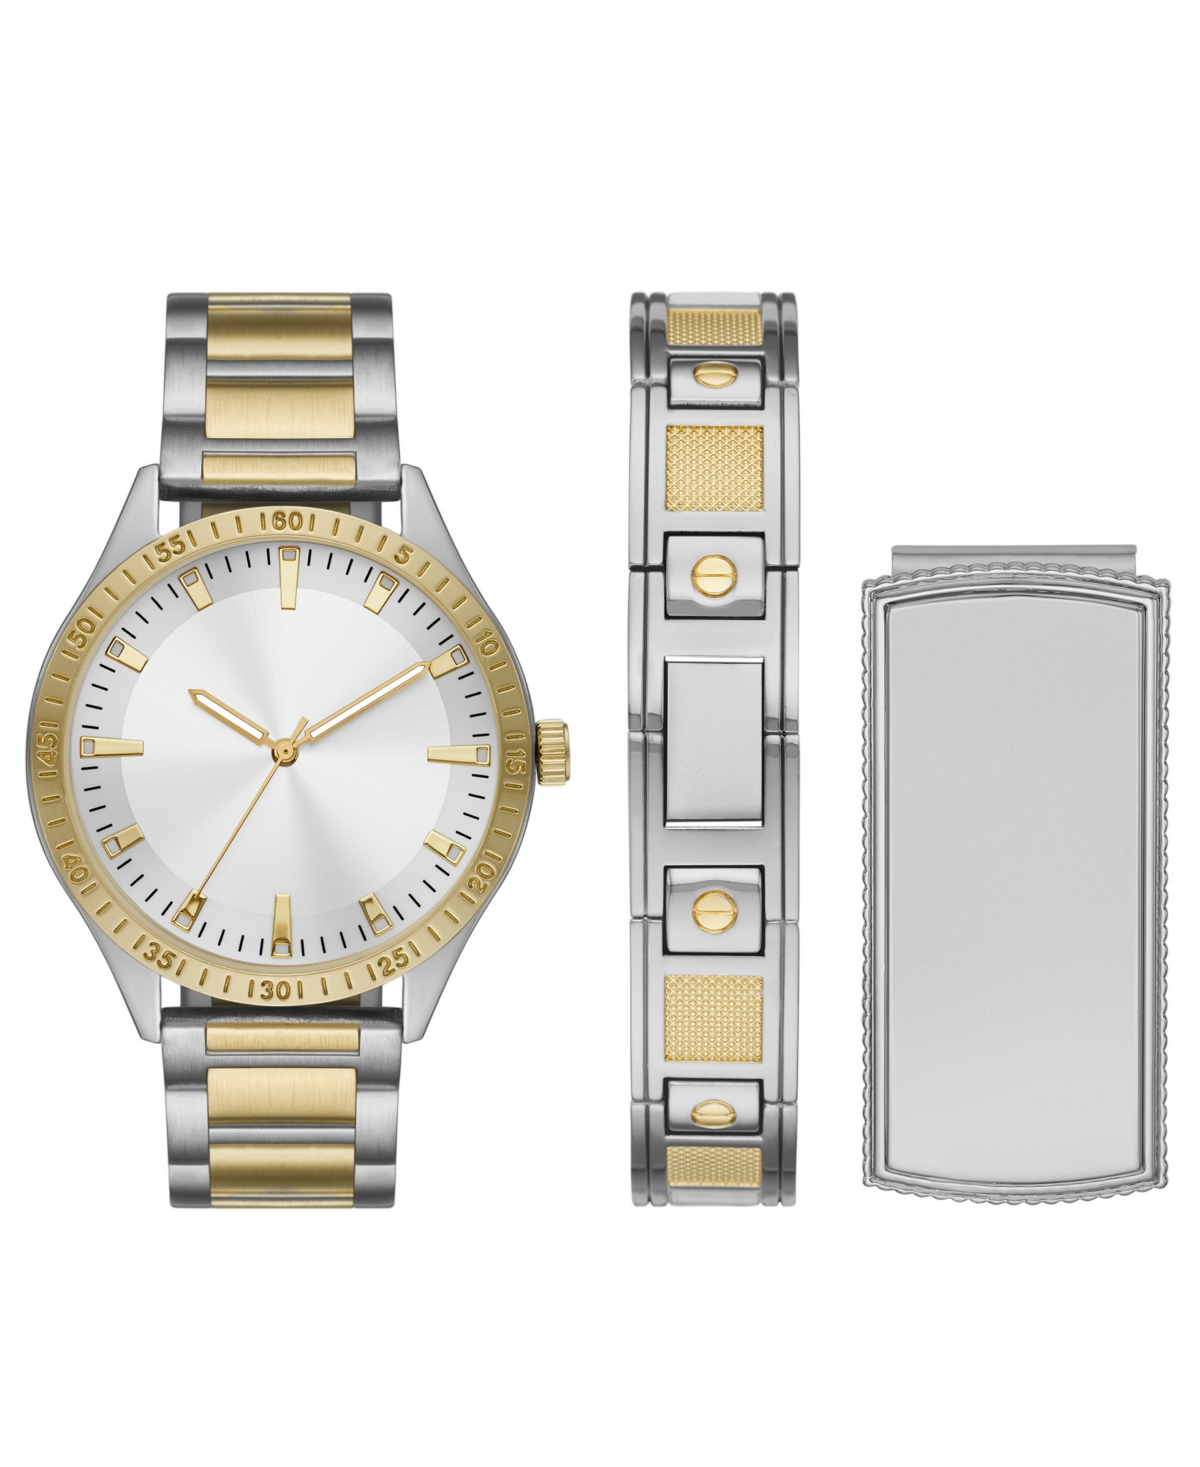 Folio Men's Silver-tone And Gold-tone Stainless Steel Bracelet Watch, 45mm Gift Set